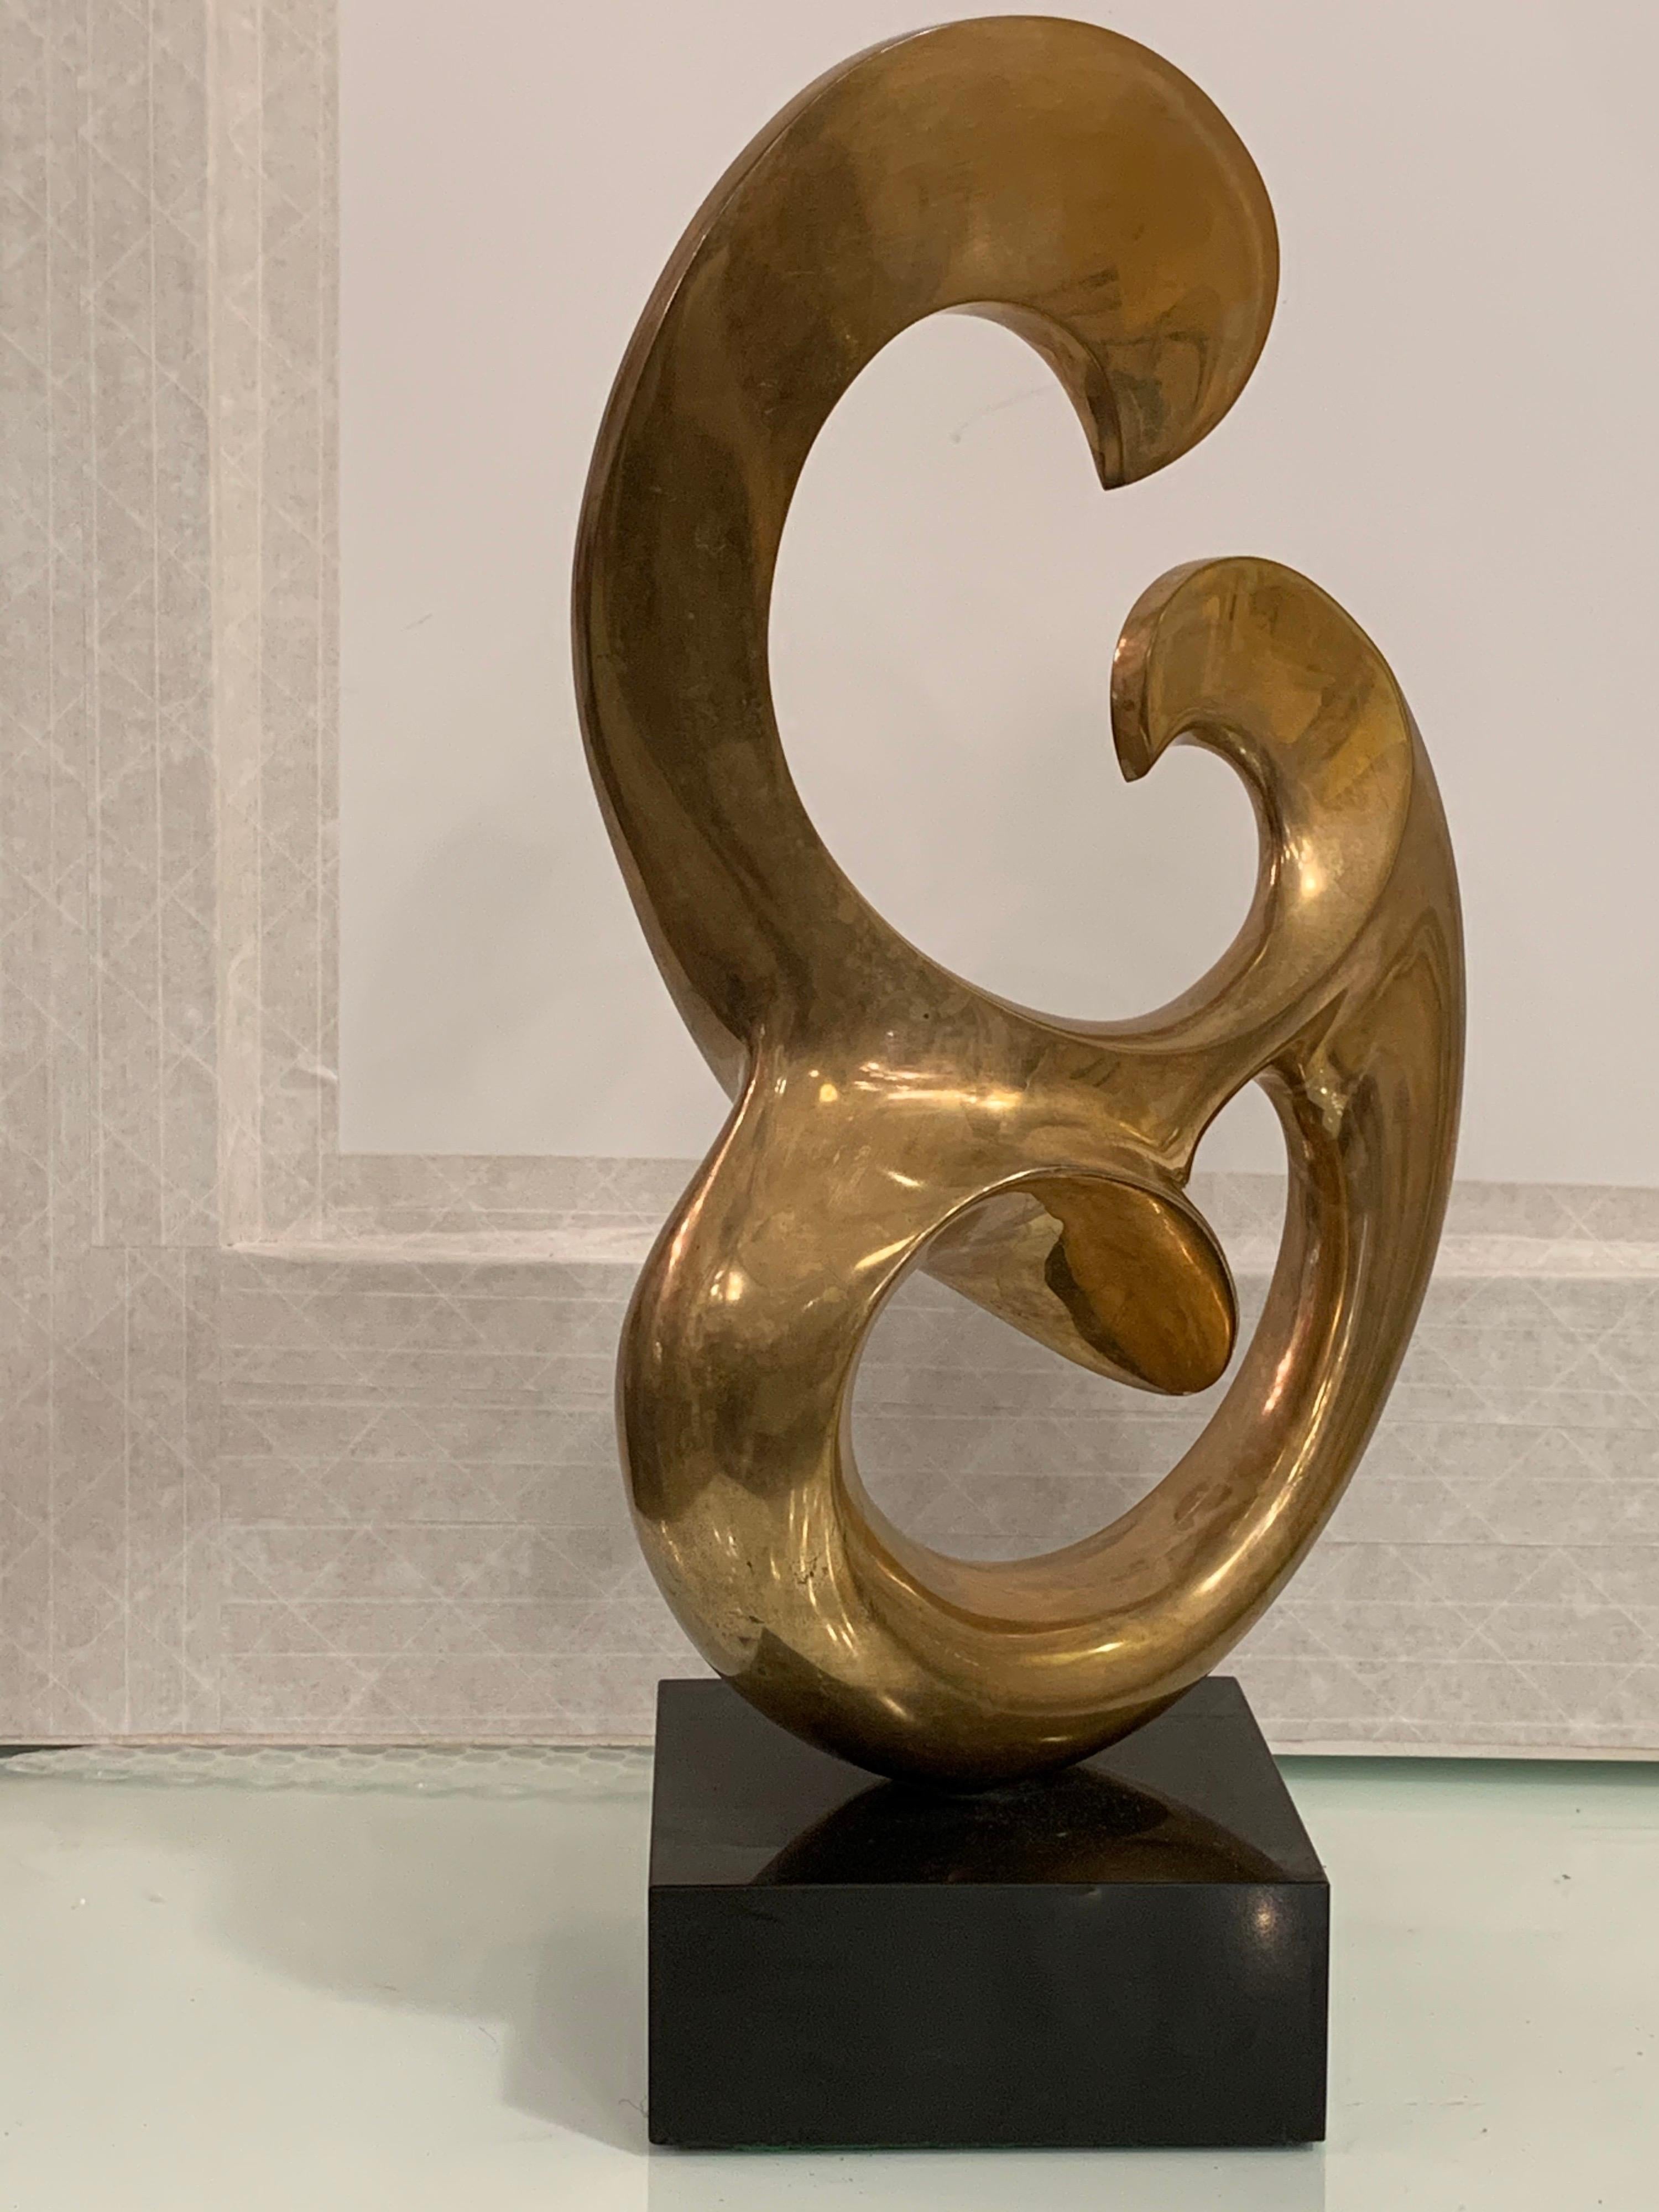 Organic Modern Bronze Sculpture by Antonio Grediaga Kieff, Signed and Numbered